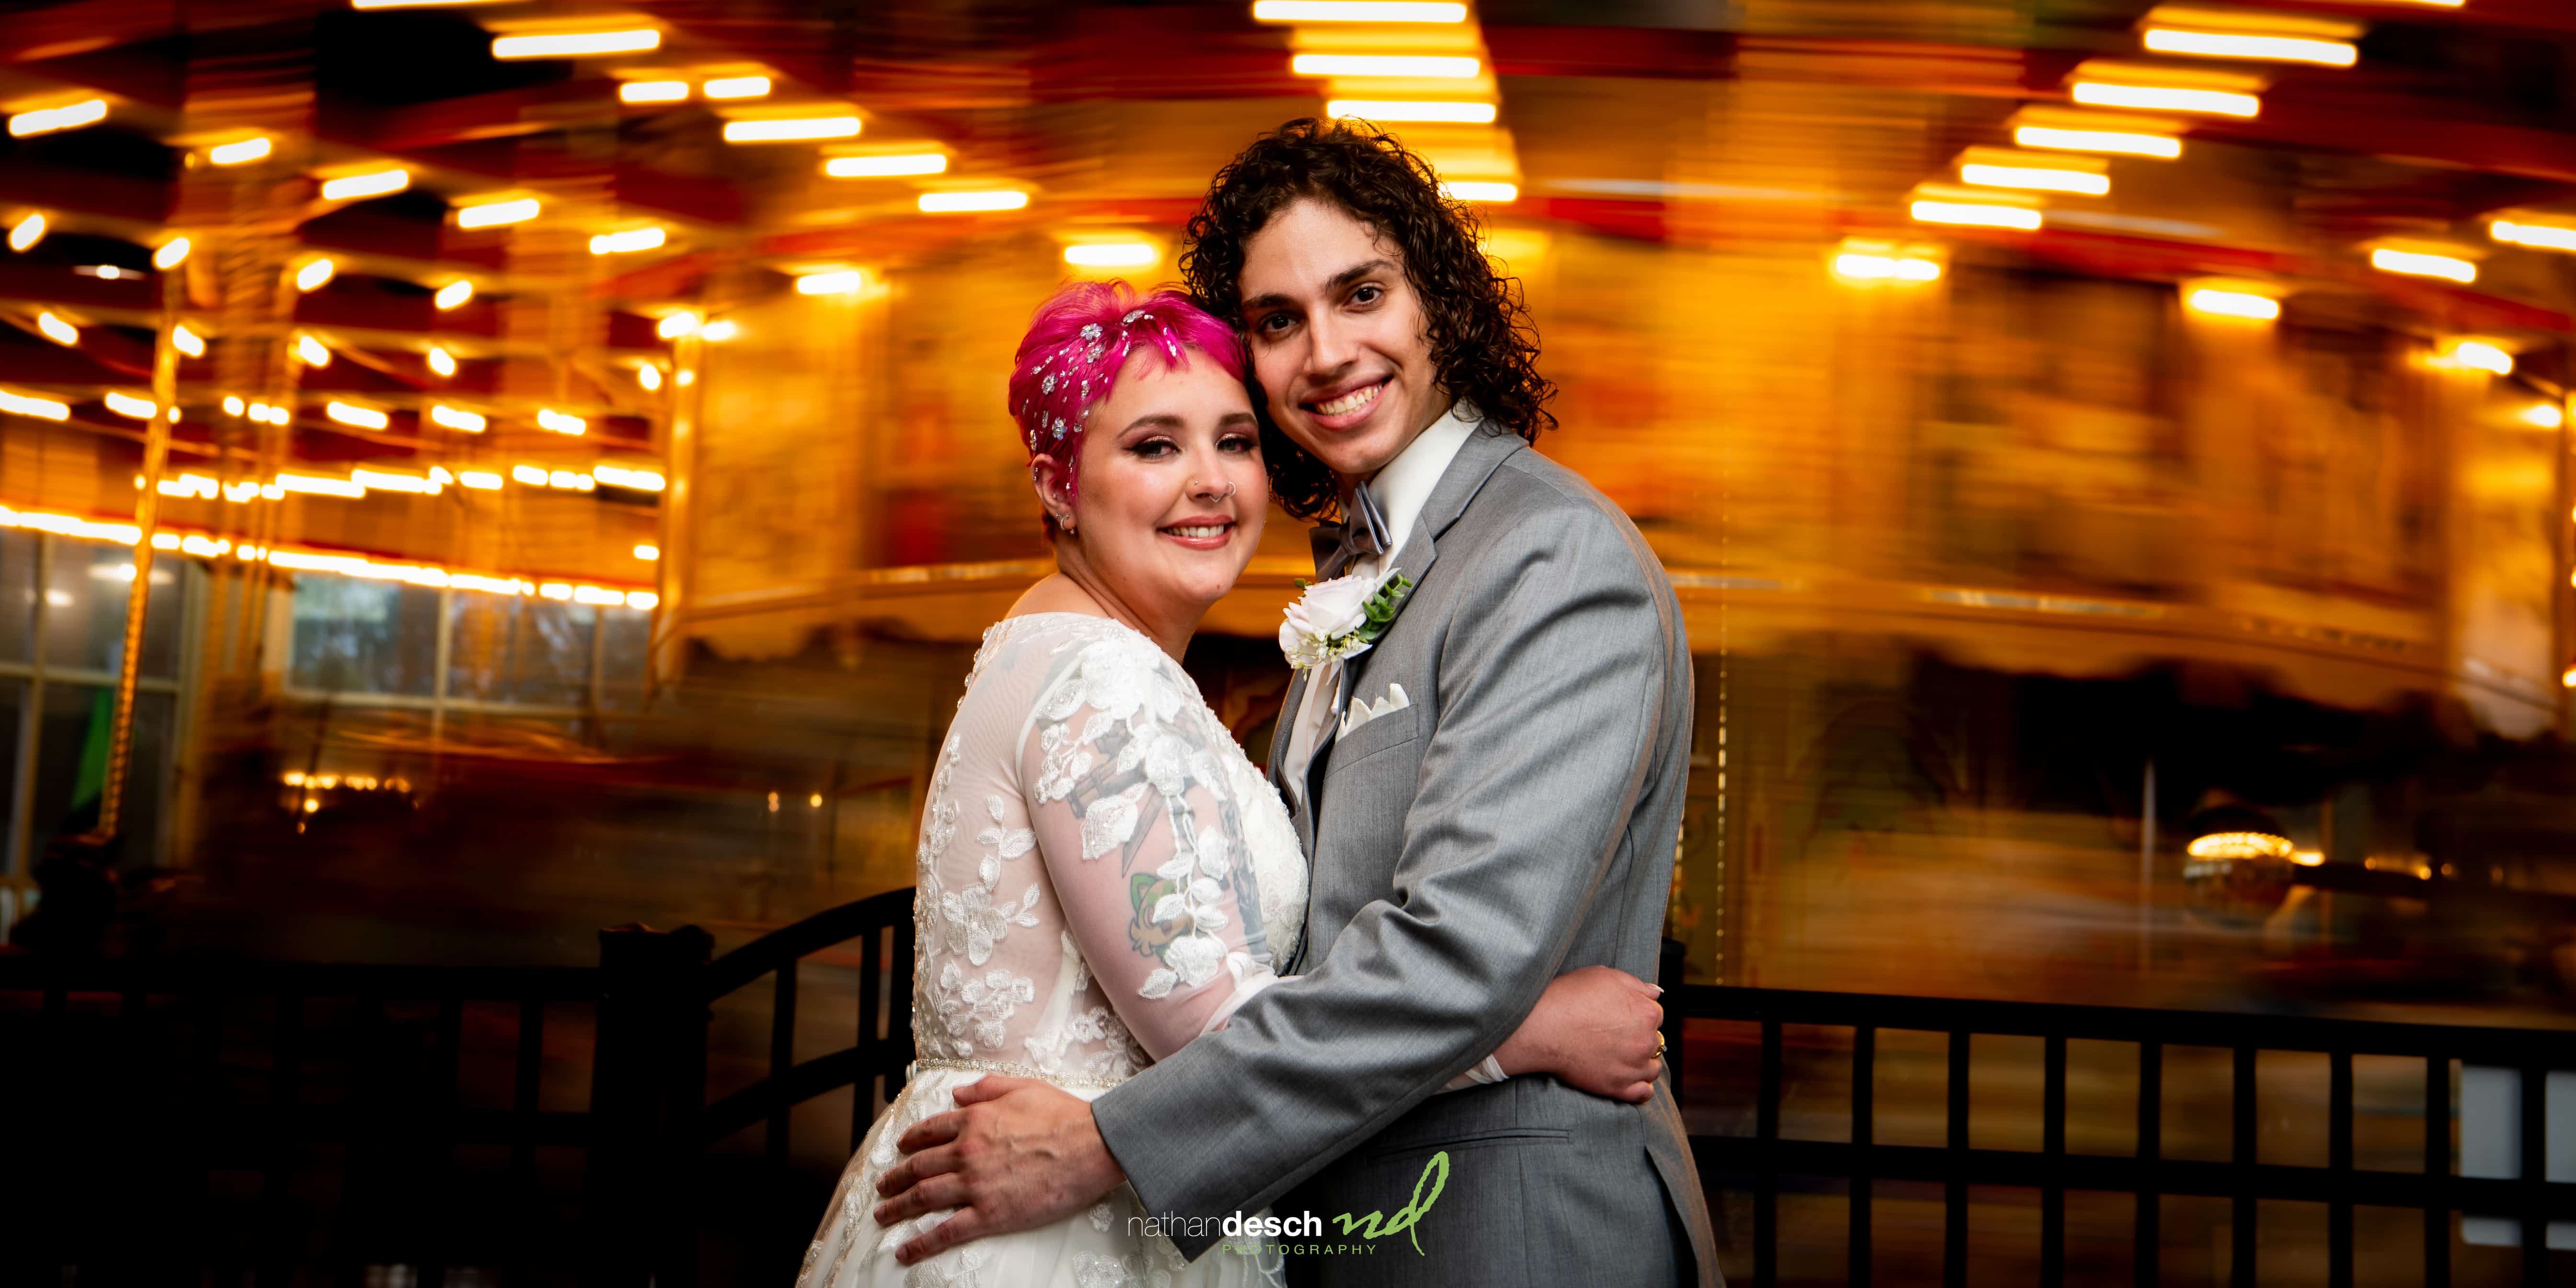 Bride and groom at pottstown carousel